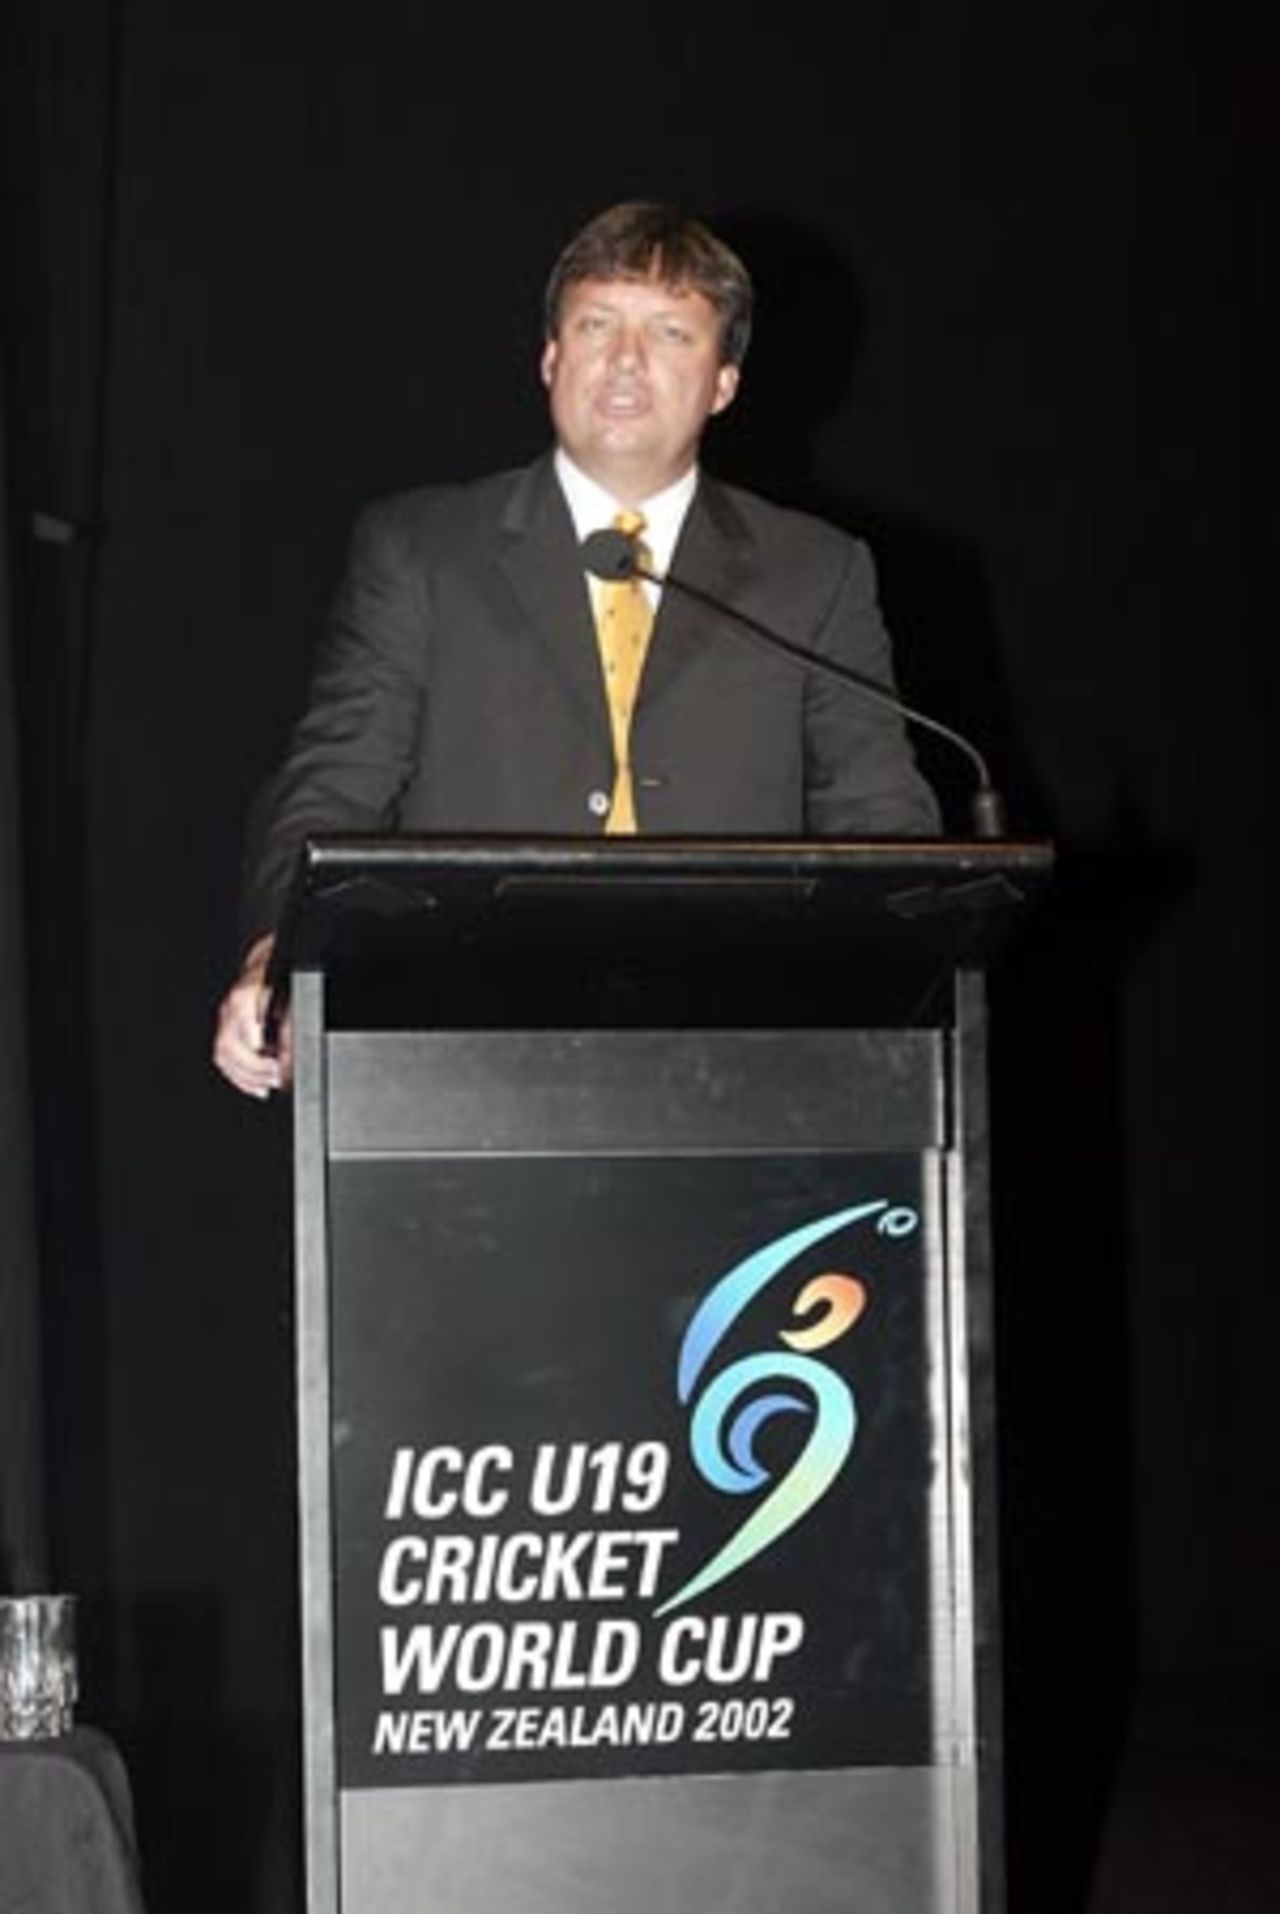 New Zealand Cricket chief executive Martin Snedden delivers a speech at the ICC Under-19 World Cup opening ceremony at the Christchurch Convention Centre. 14 January 2002.